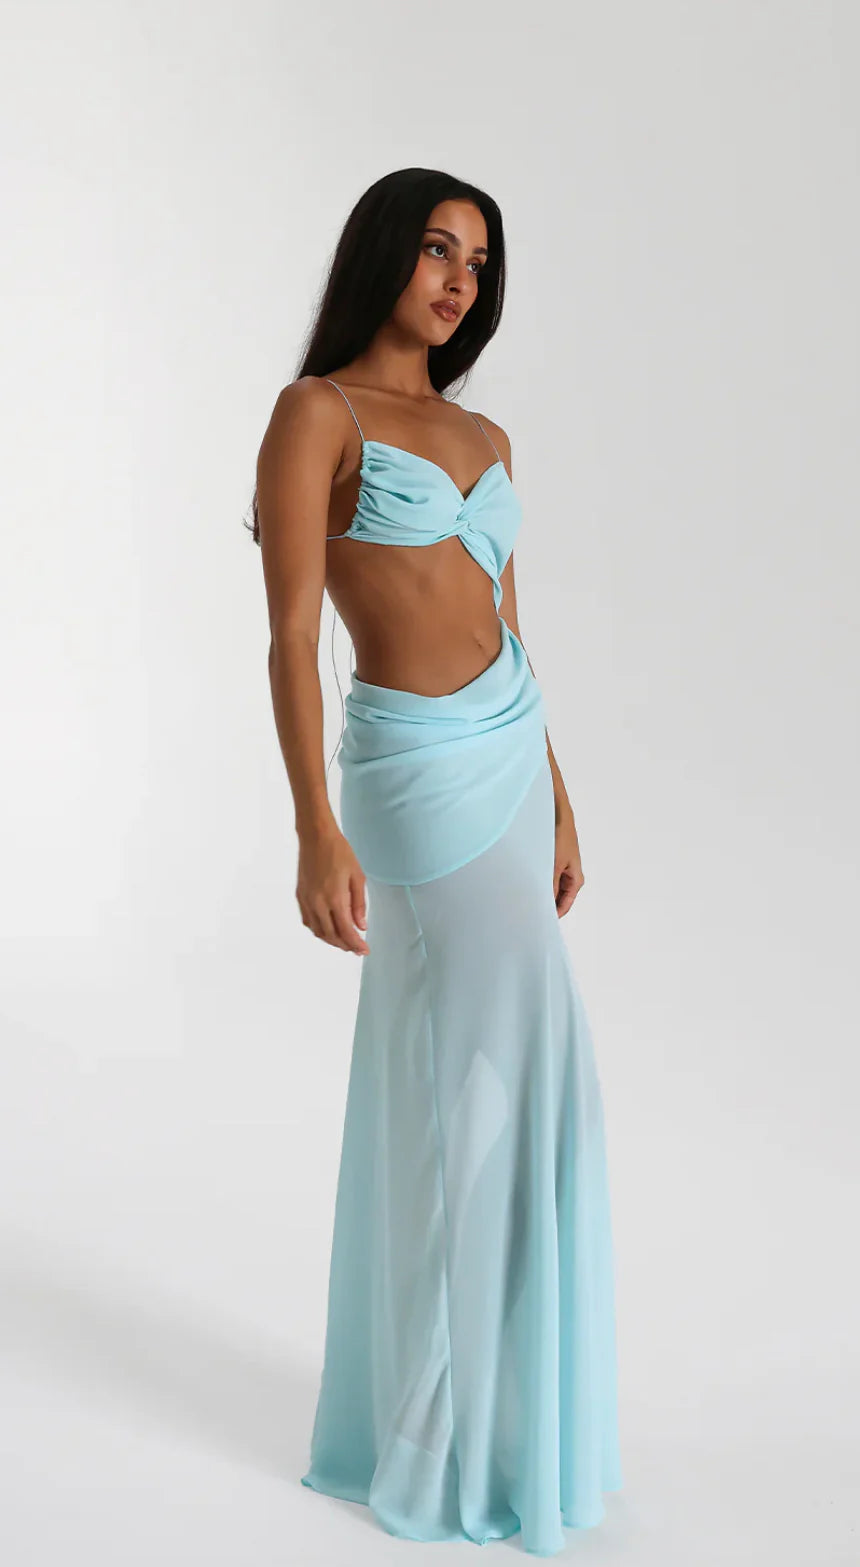 Hire Natalie Rolt Dahlia Dress Gown in Baby Blue